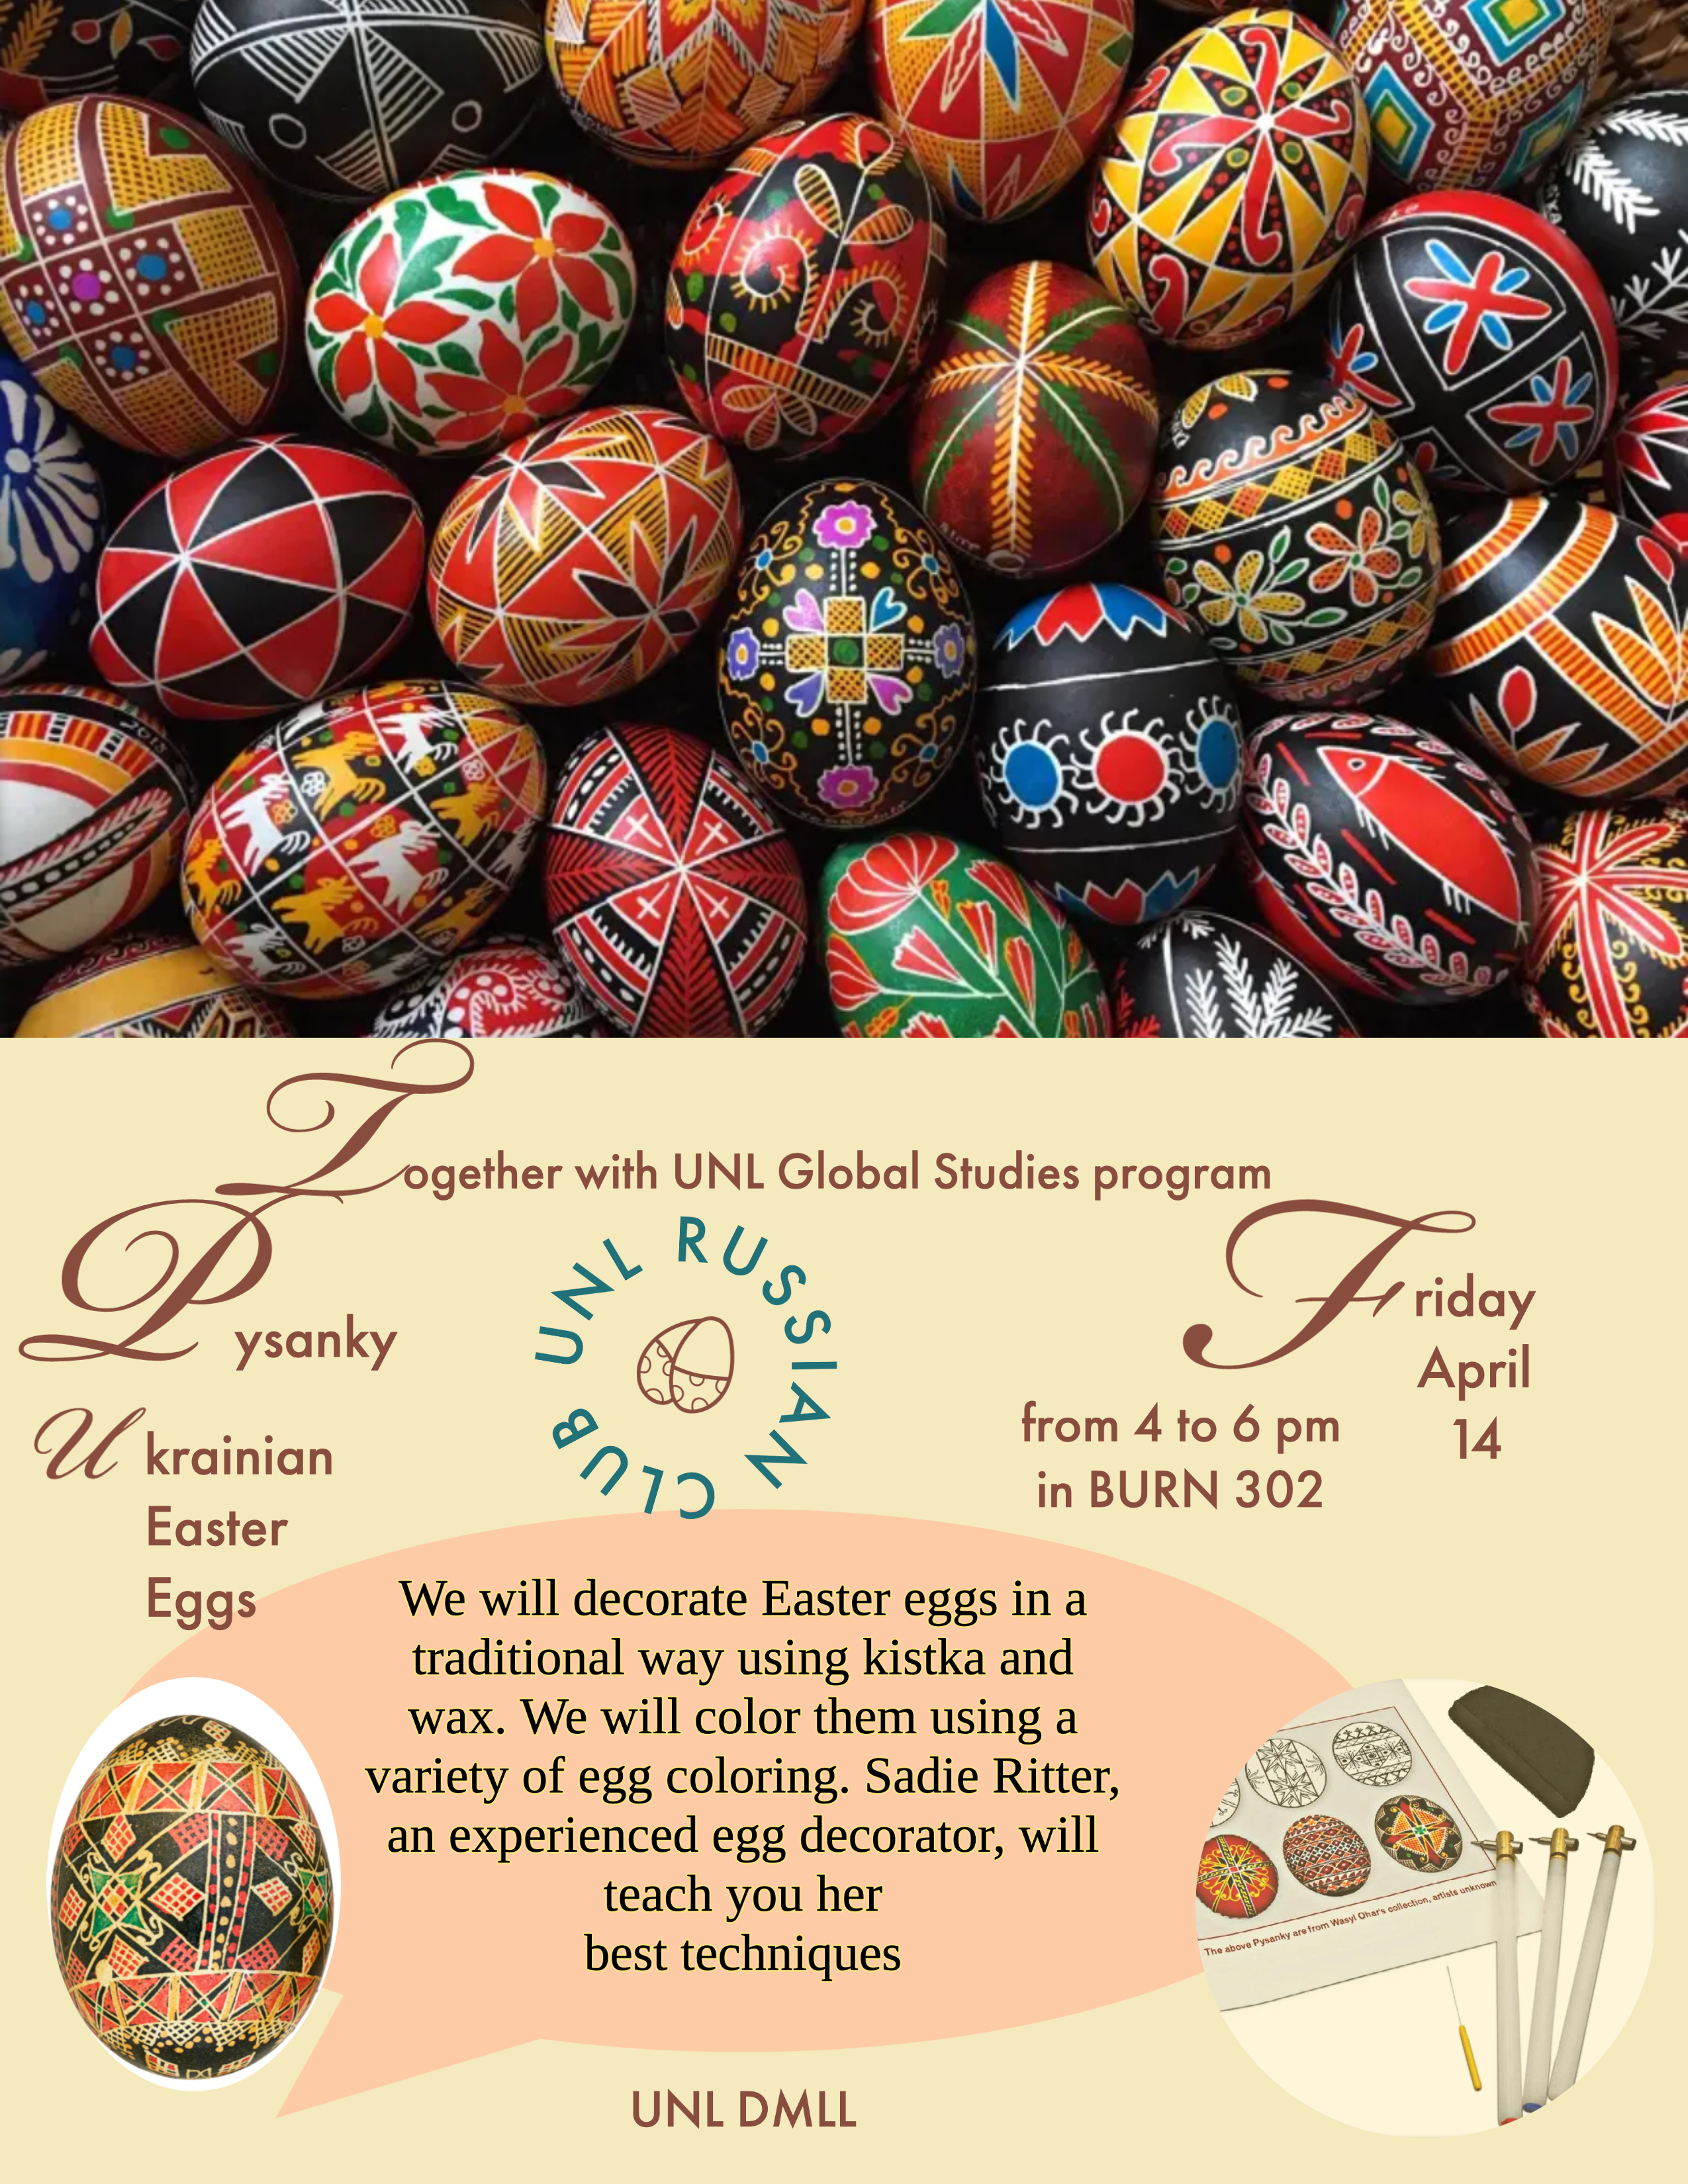 Pysanky: Ukrainian Easter Egg Decorating Traditions